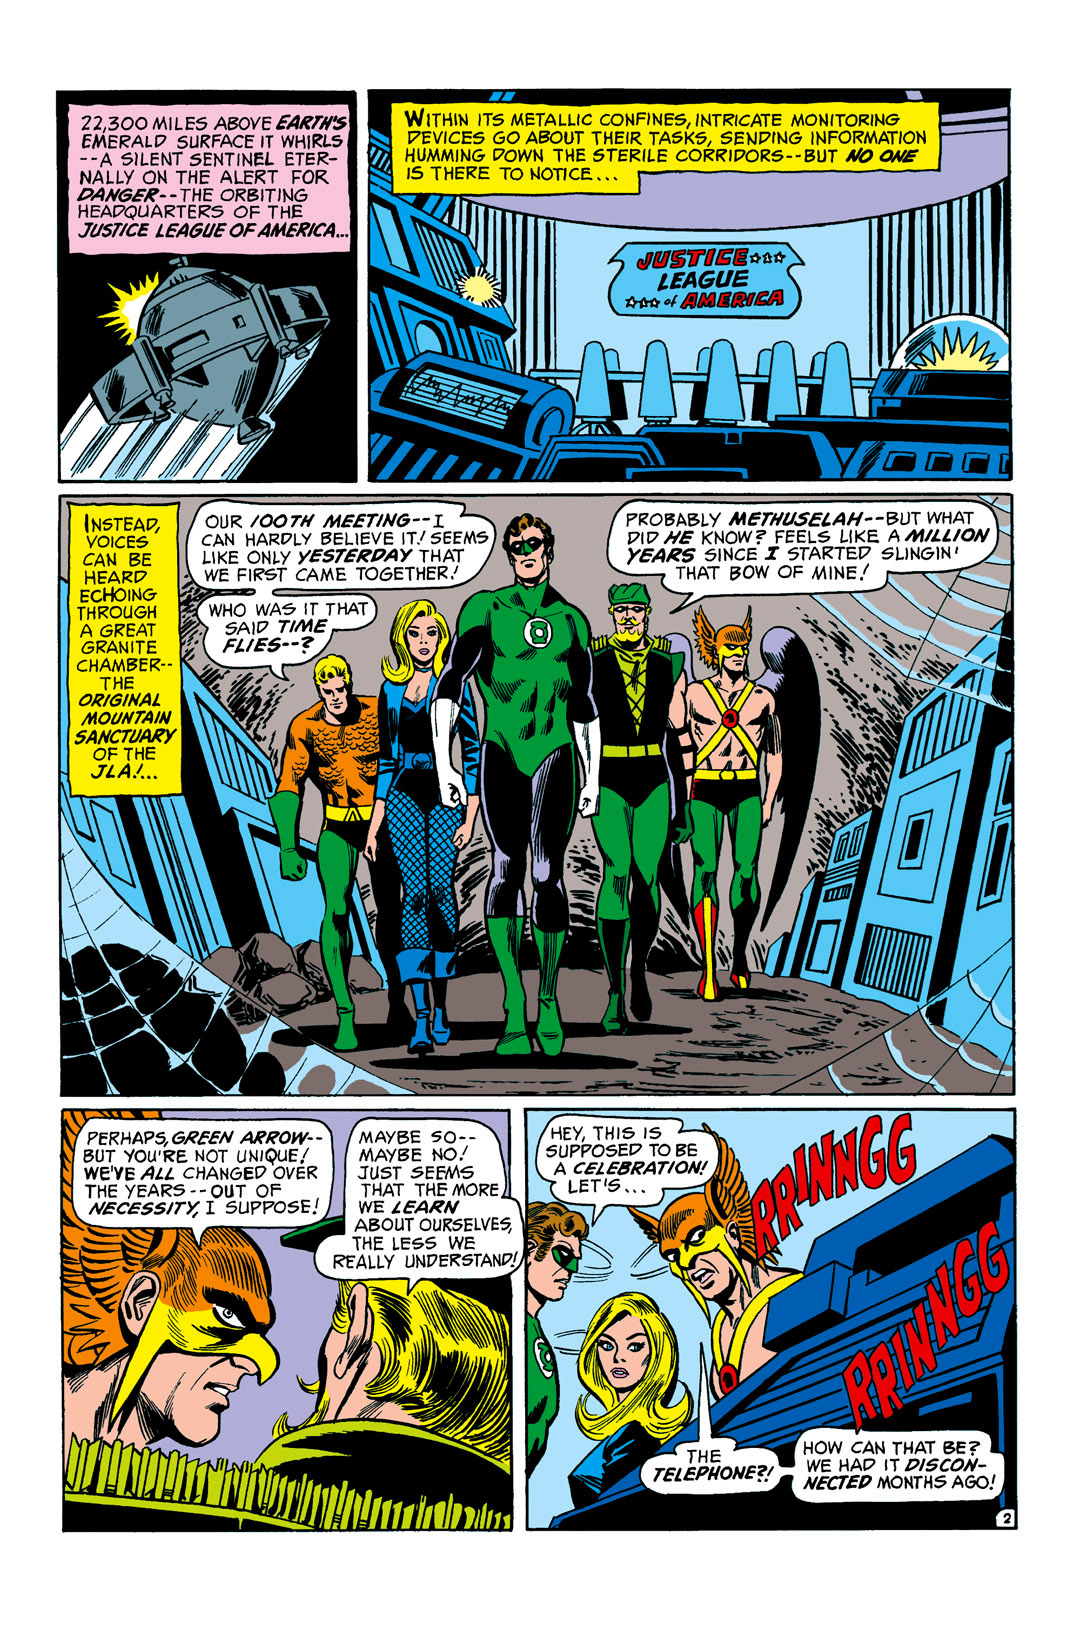 Crisis on Multiple Earths Omnibus: Chapter Crisis-on-Multiple-Earths-19 - Page 3